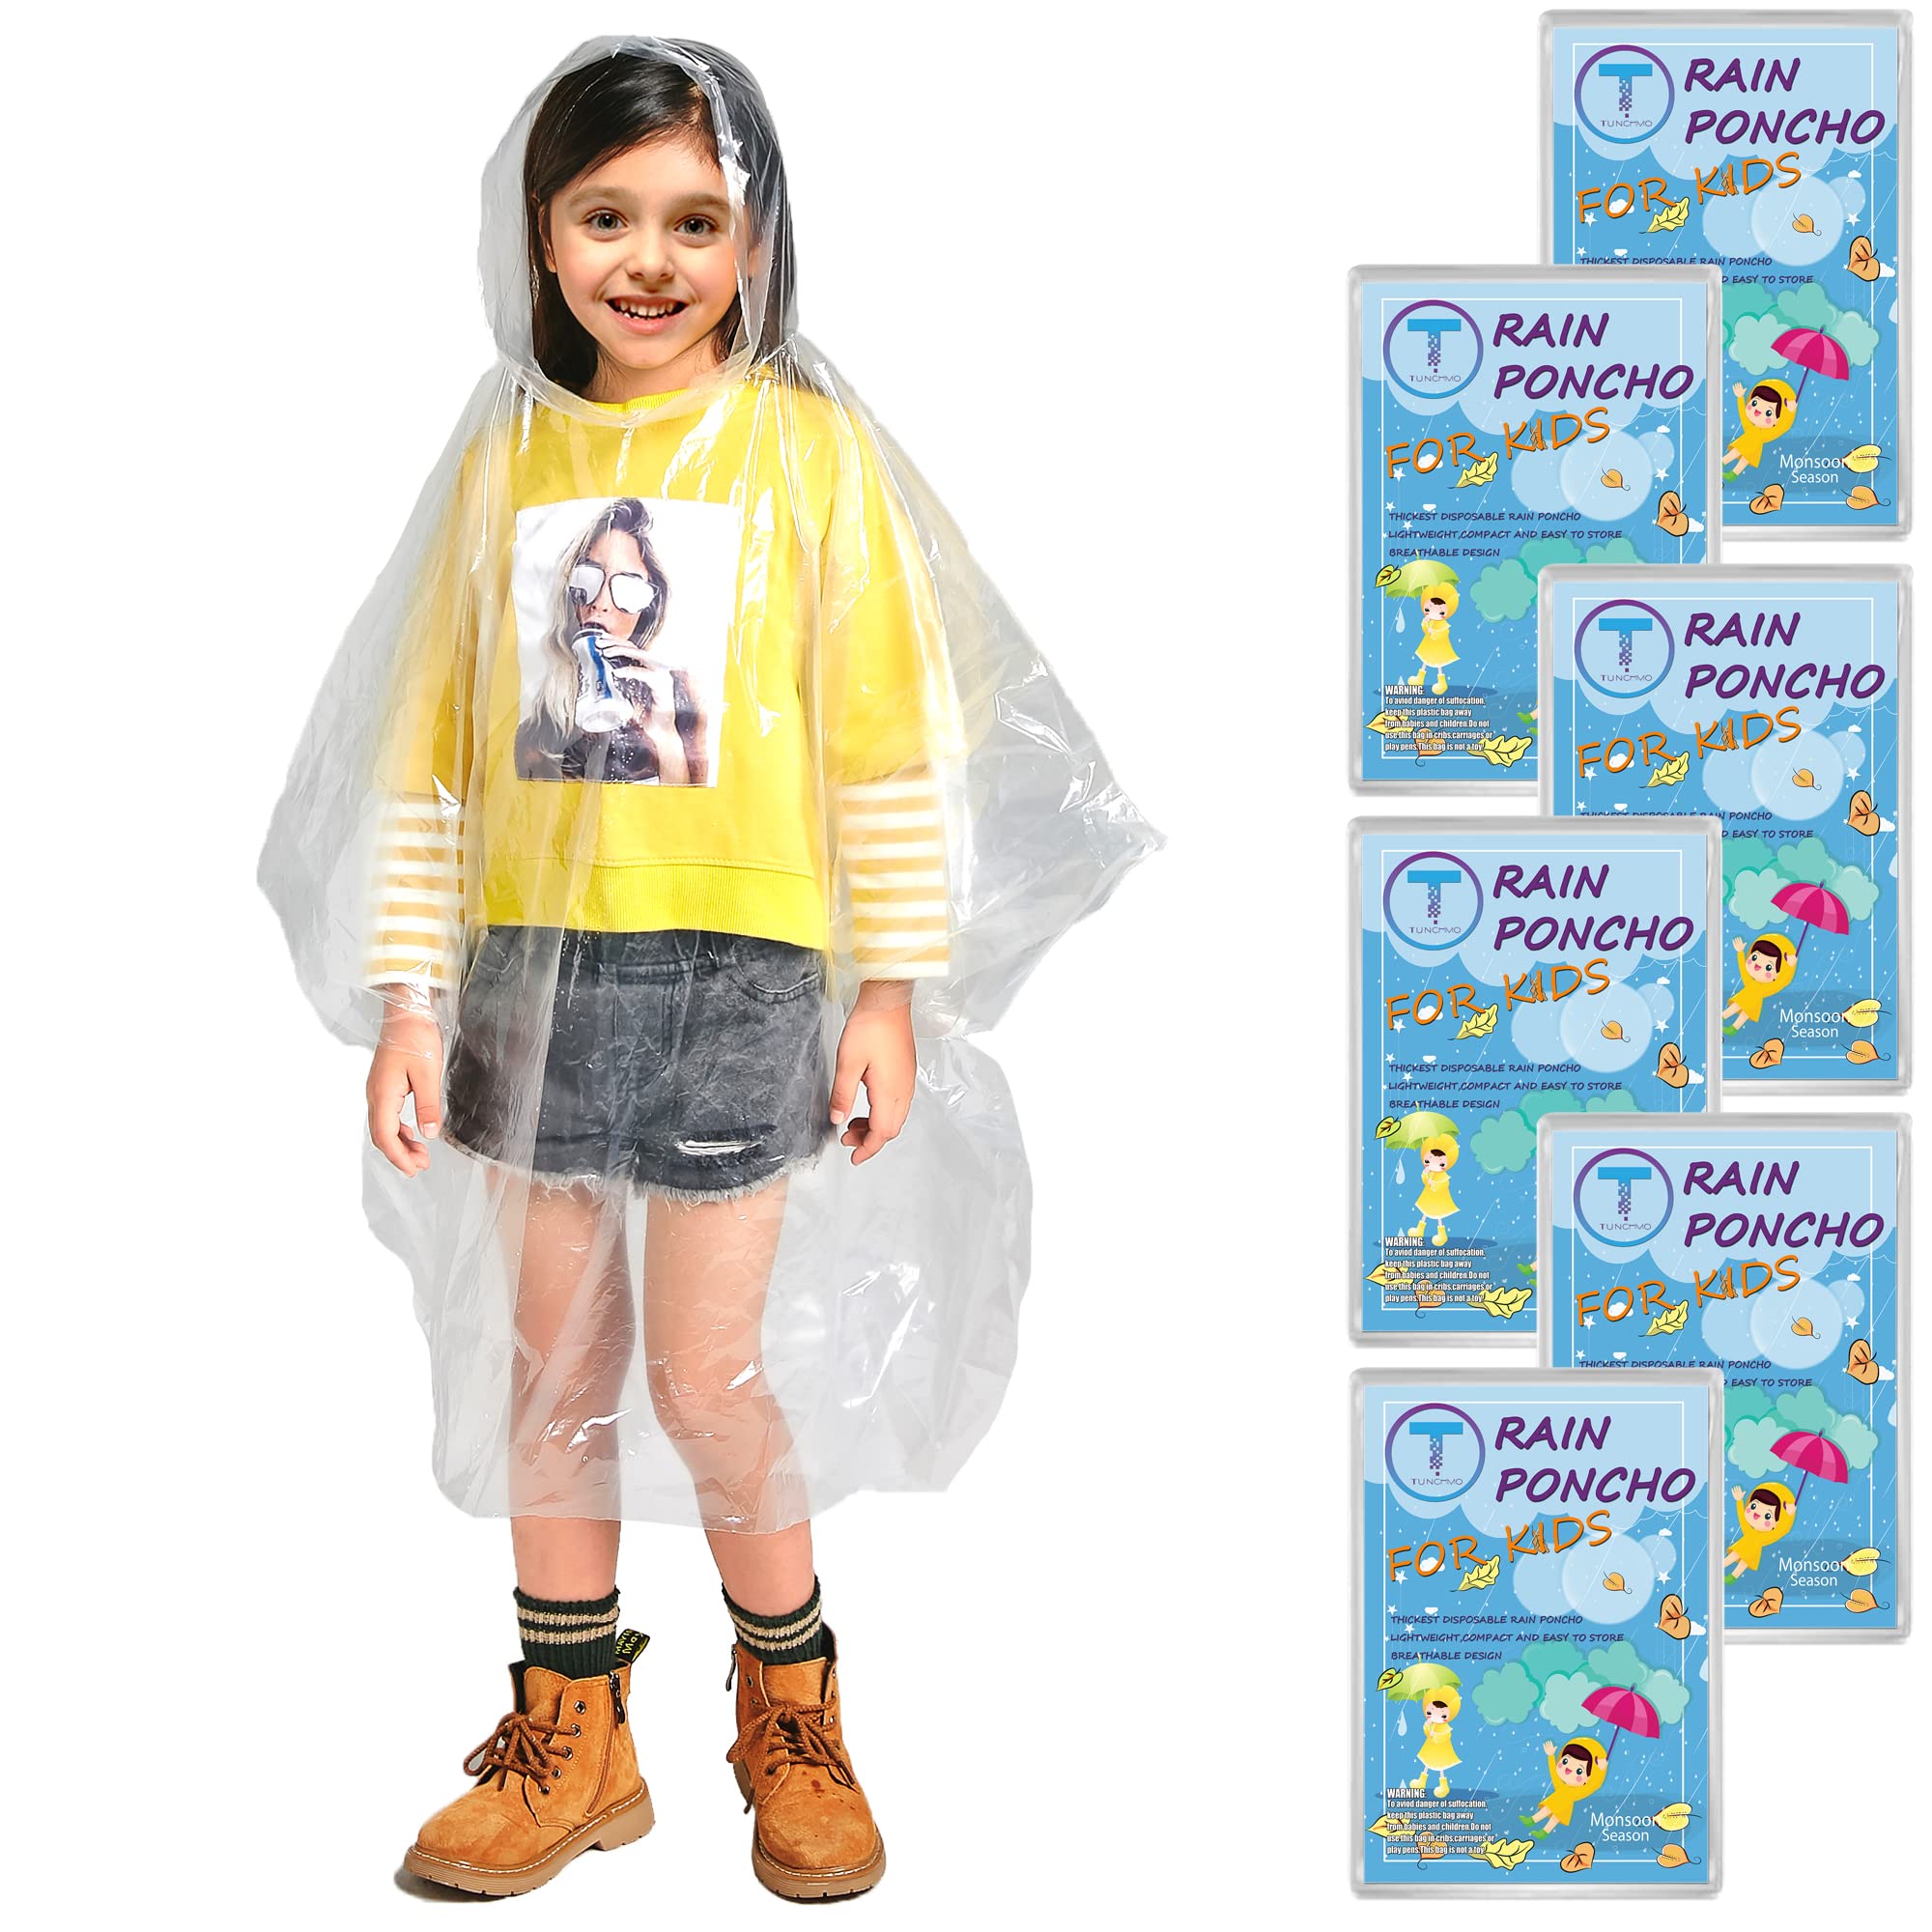 Tunchmo Disposable Rain Ponchos For Kids (6 Pack) 50% Thicker Emergency Ponchos-Clear